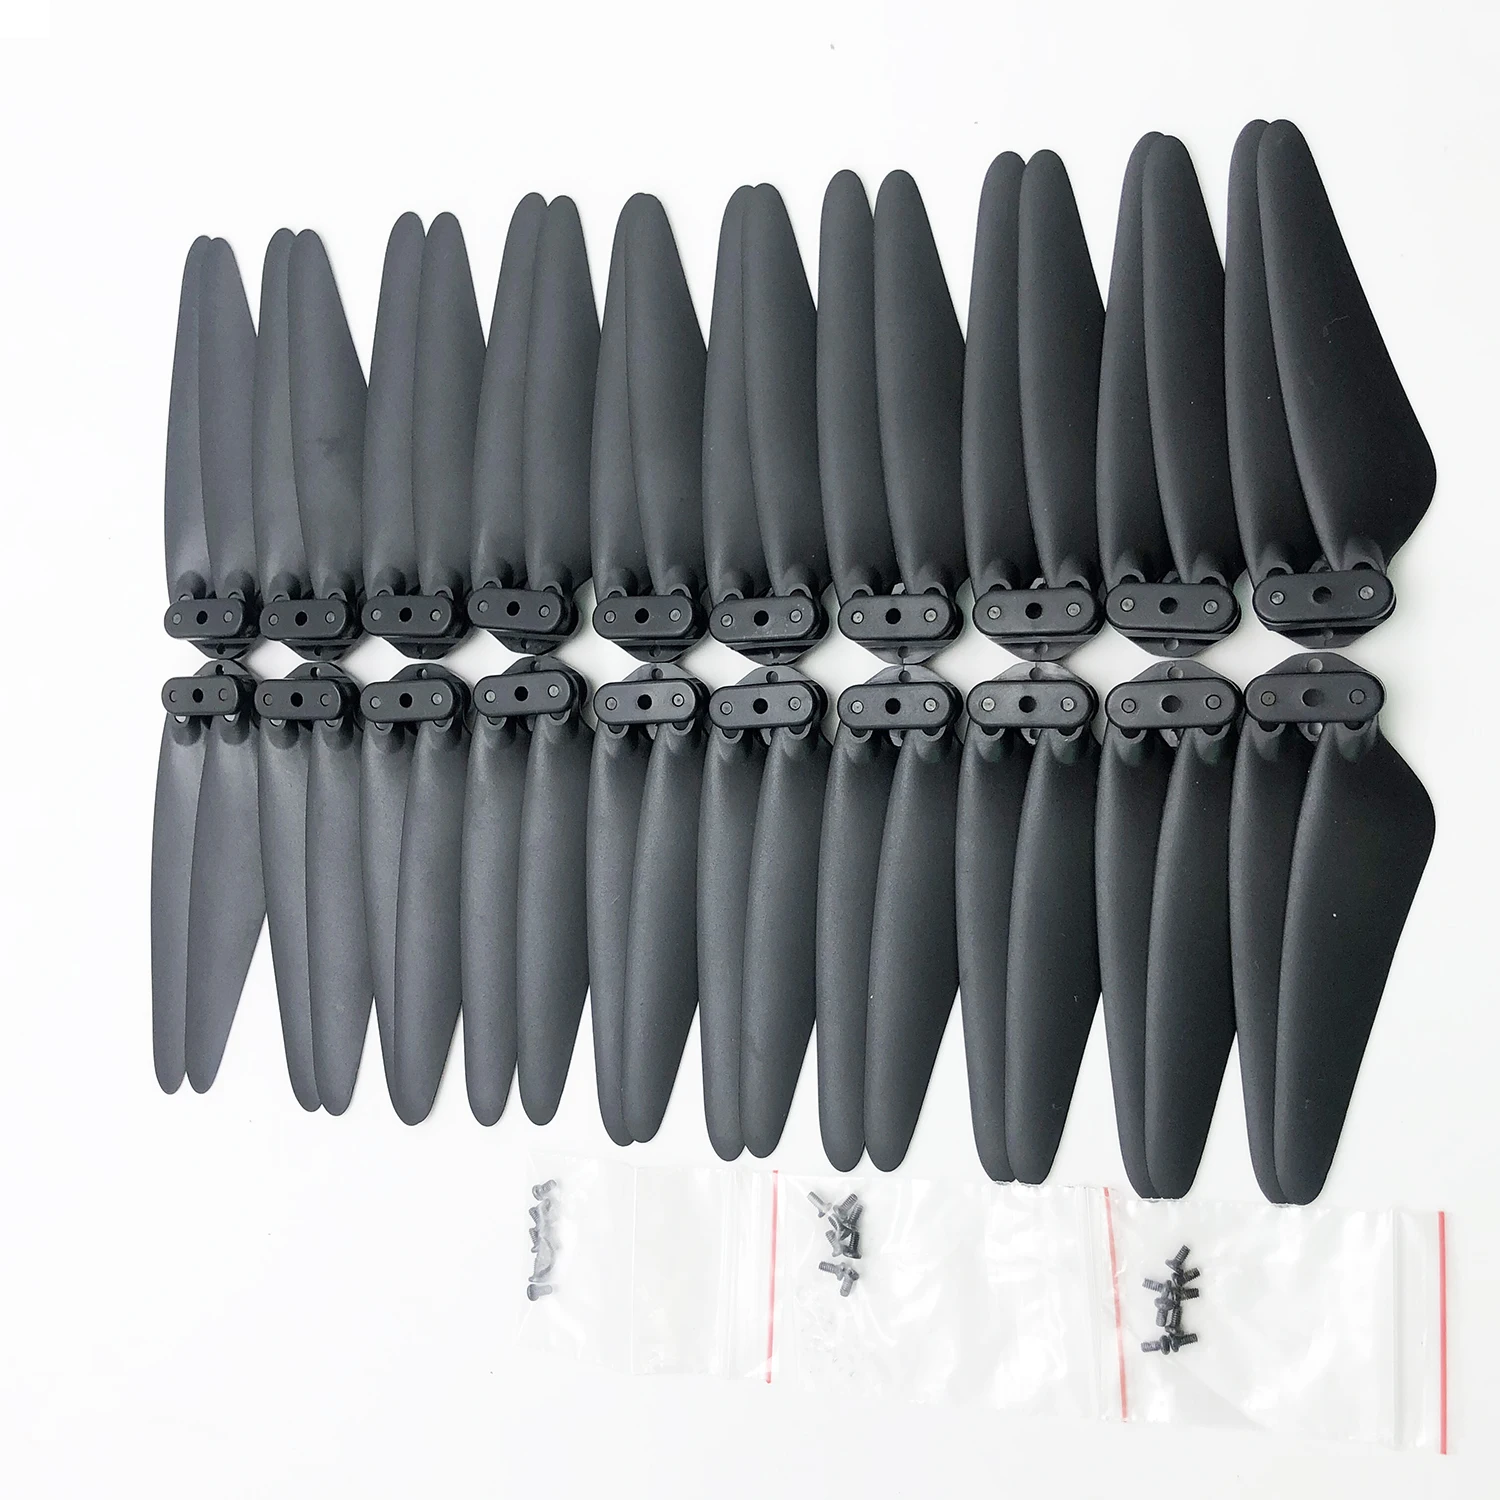 

SG906 PRO SG906MAX SG908 KUN SG908MAX Drone Main Blade Wings Propeller Spare Part RC Helicopter Replacement Accessory